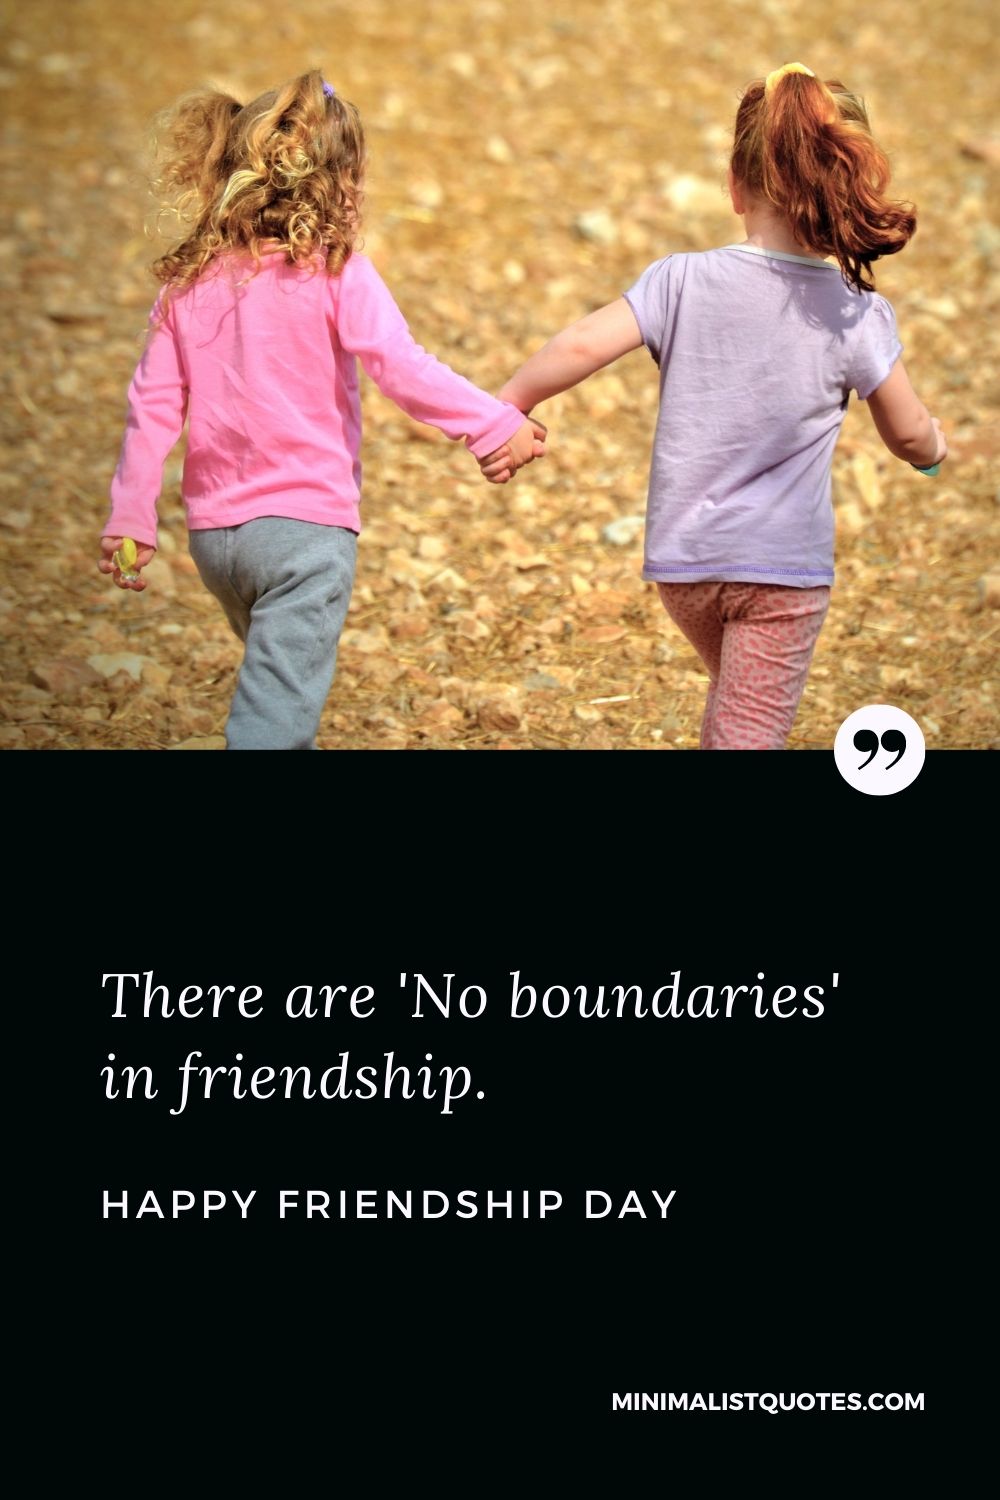 There are 'No boundaries' in friendship. Happy Friendship Day!